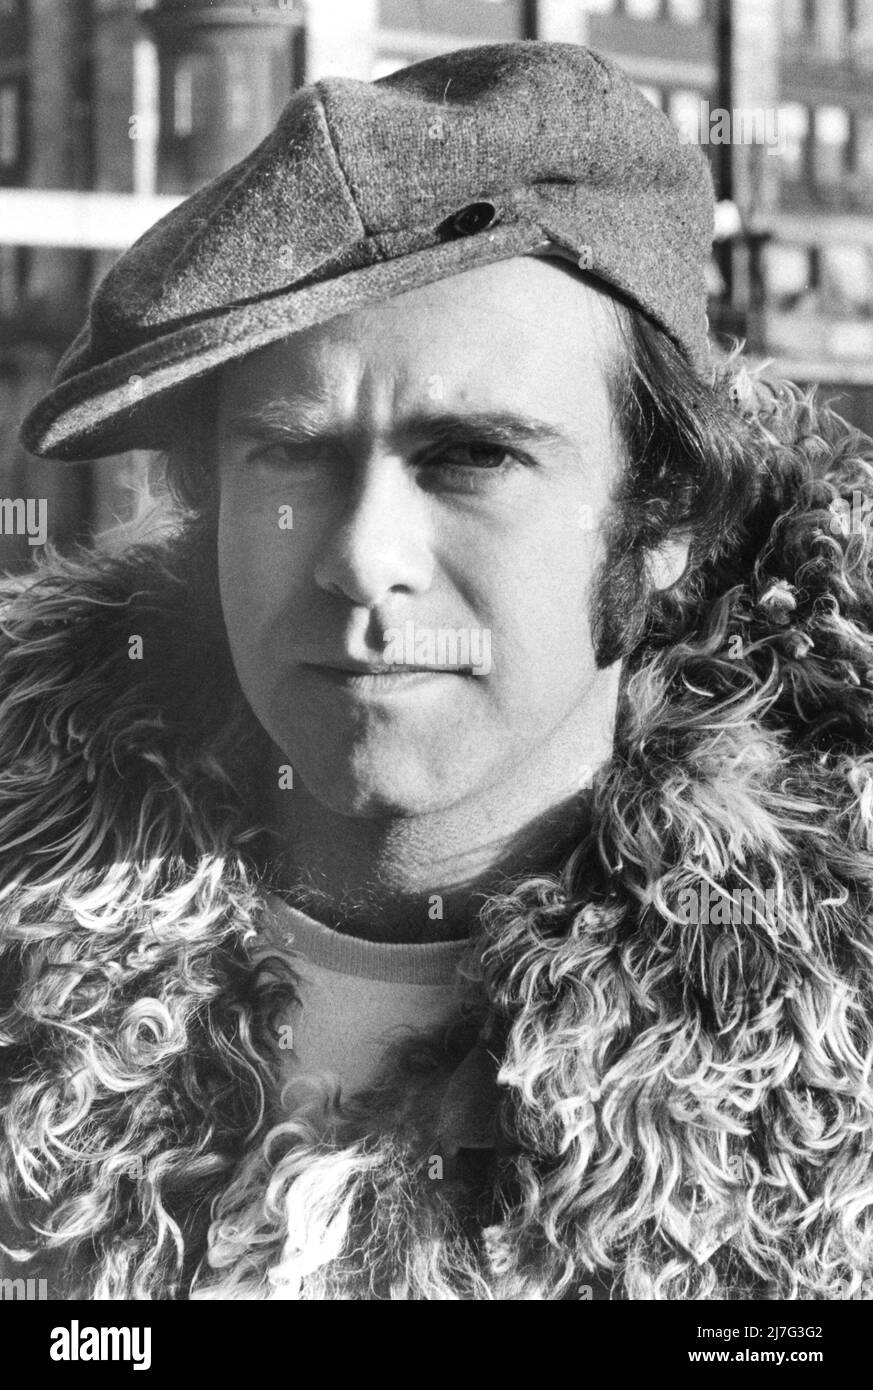 Elton John. English singer, songwriter born march 25 1947. Pictured during a visit to Sweden 1978 Stock Photo